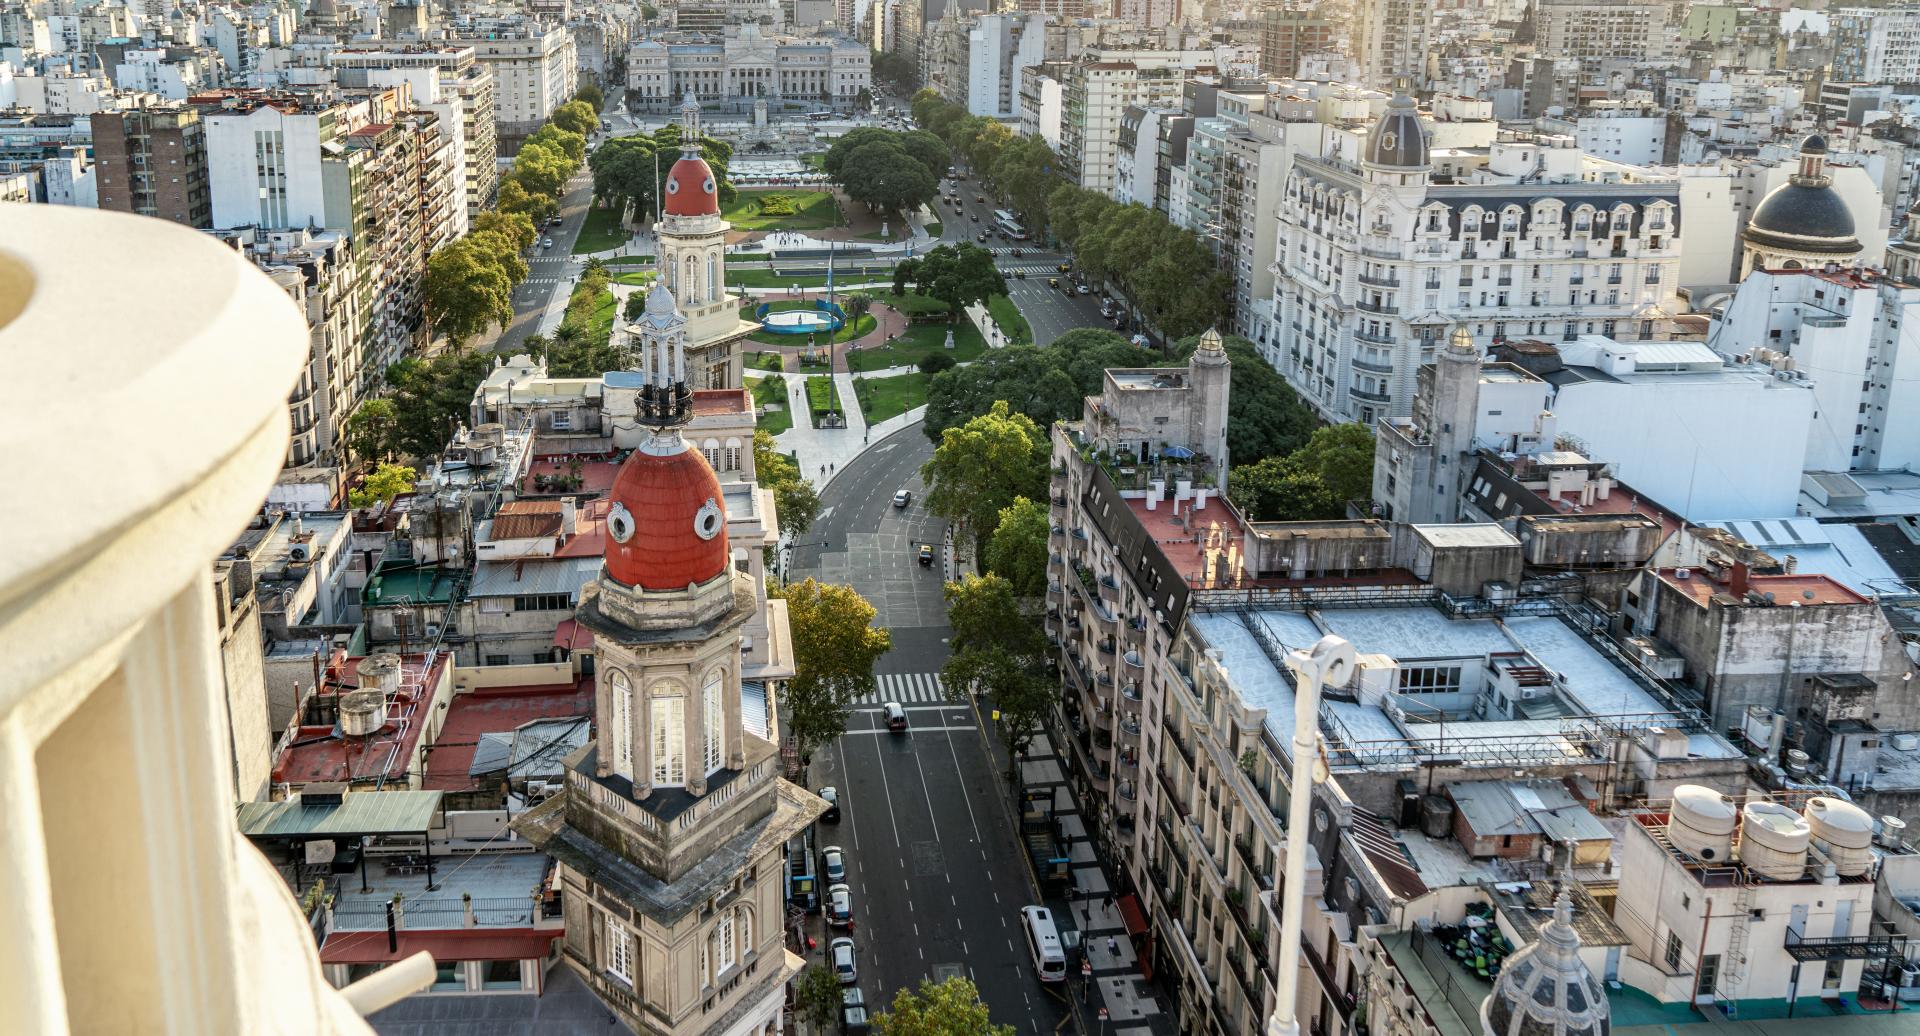 What to do in Buenos Aires?